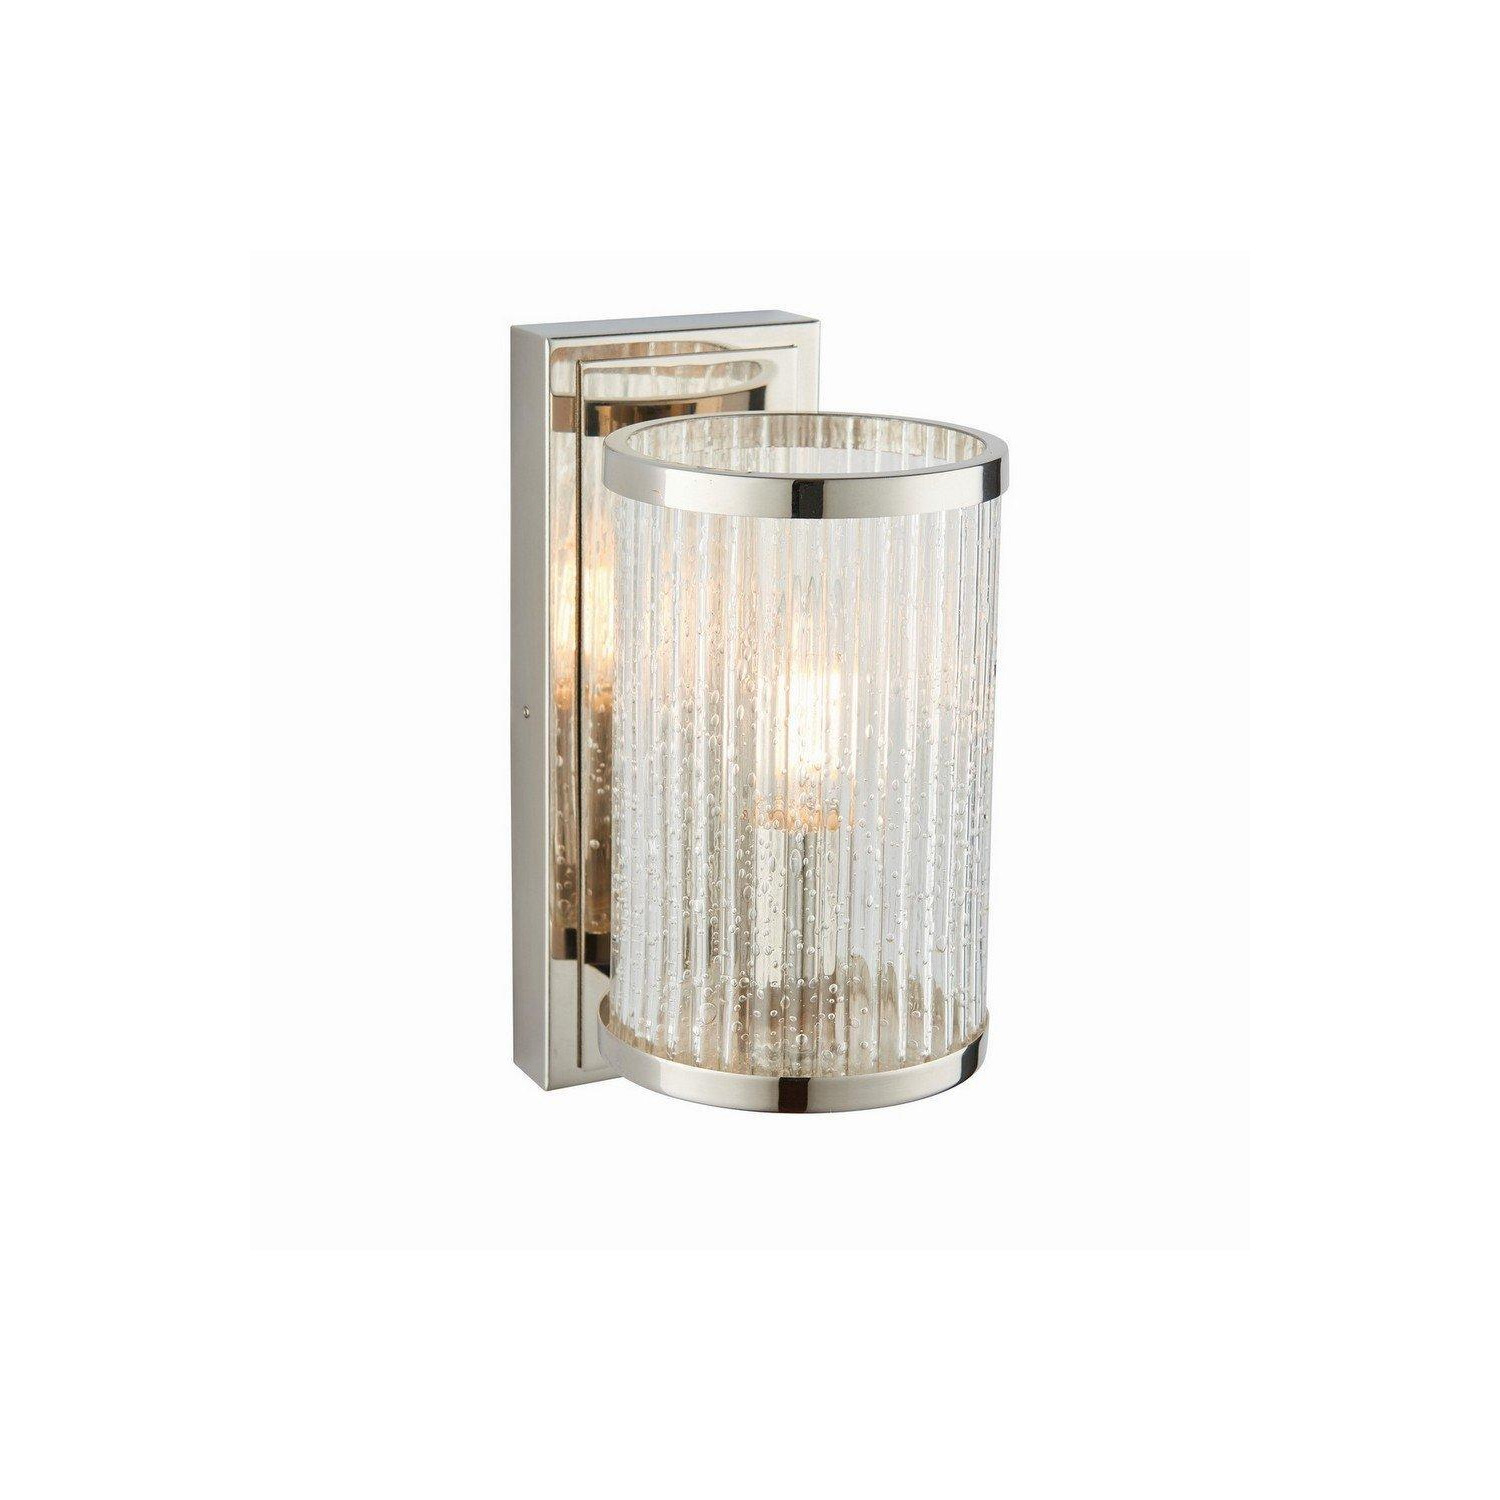 Easton 1 Light Wall Bright Nickel Ribbed Glass With Bubbles E14 - image 1